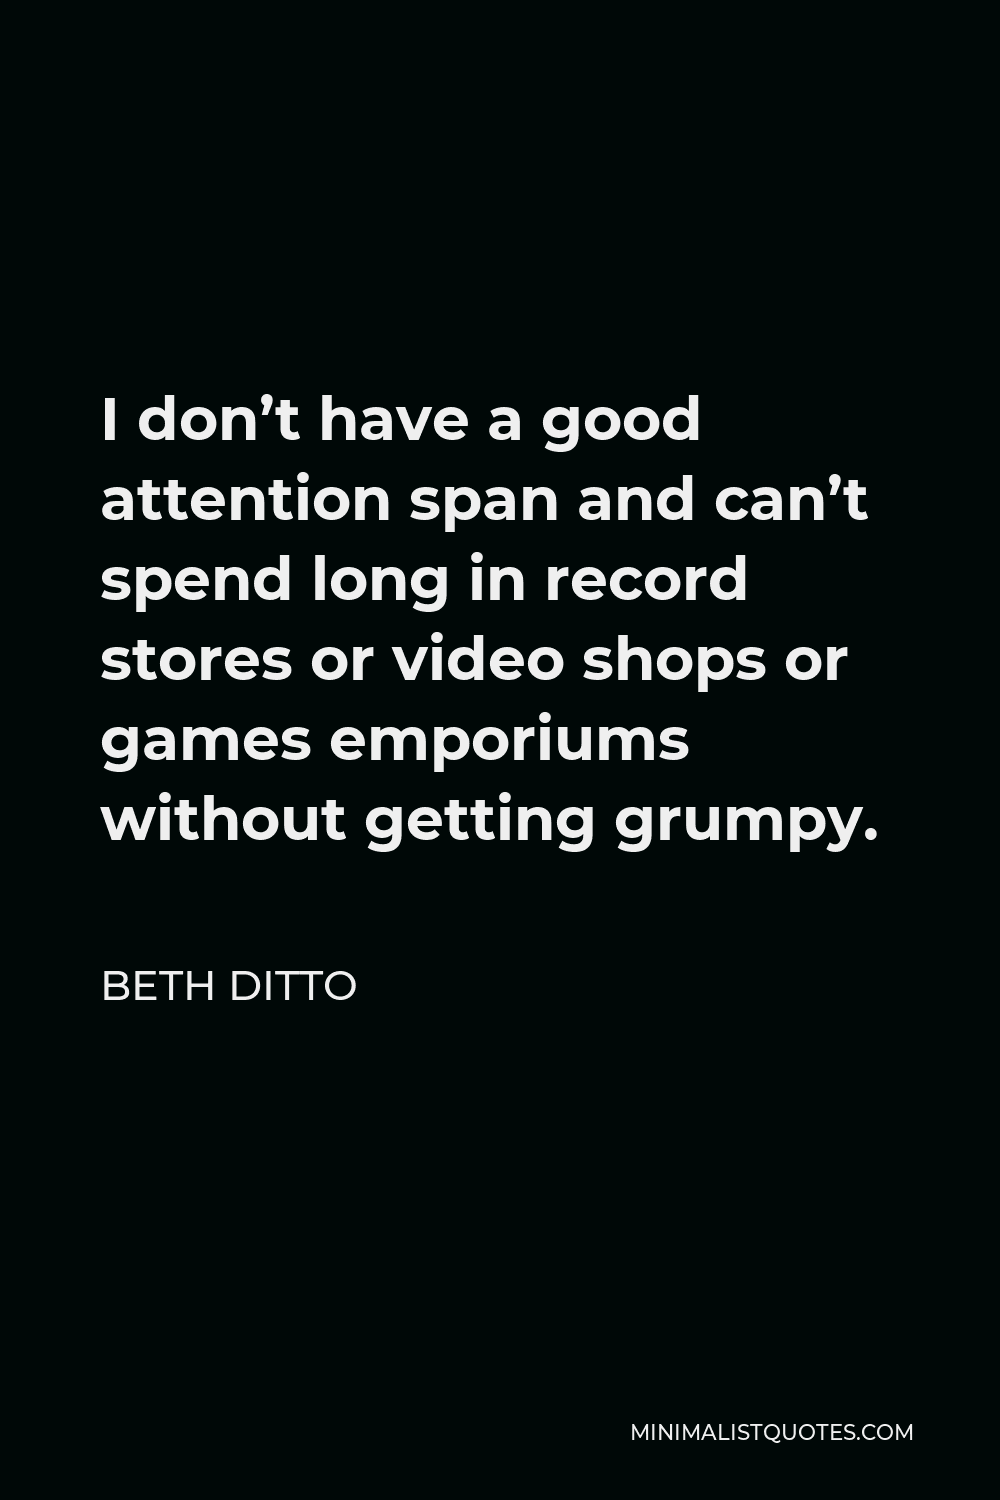 Beth Ditto Quote - I don’t have a good attention span and can’t spend long in record stores or video shops or games emporiums without getting grumpy.